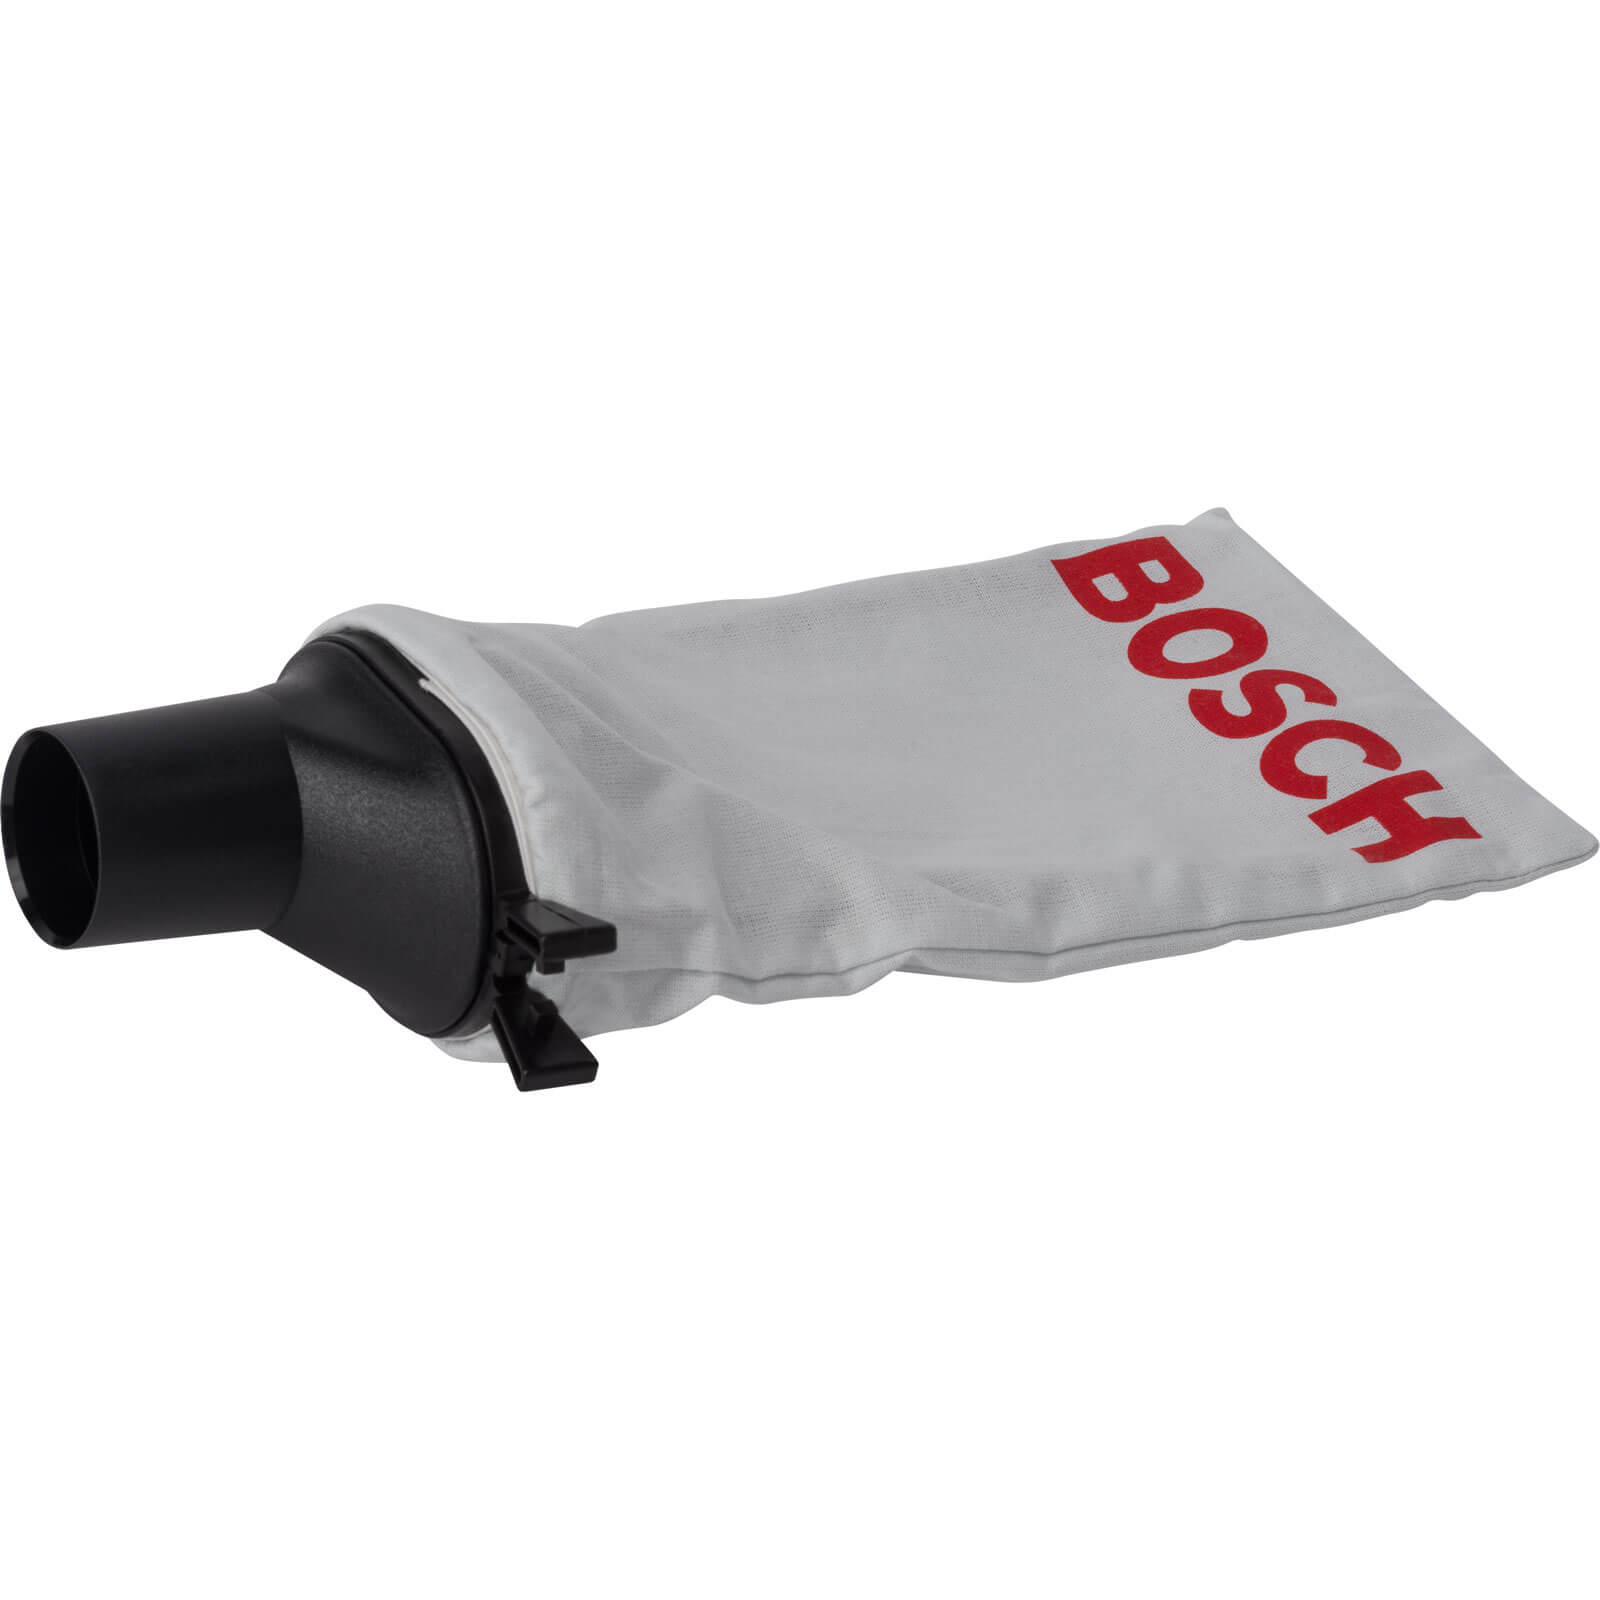 Photo of Bosch Dust Bag For Handheld Circular Saws